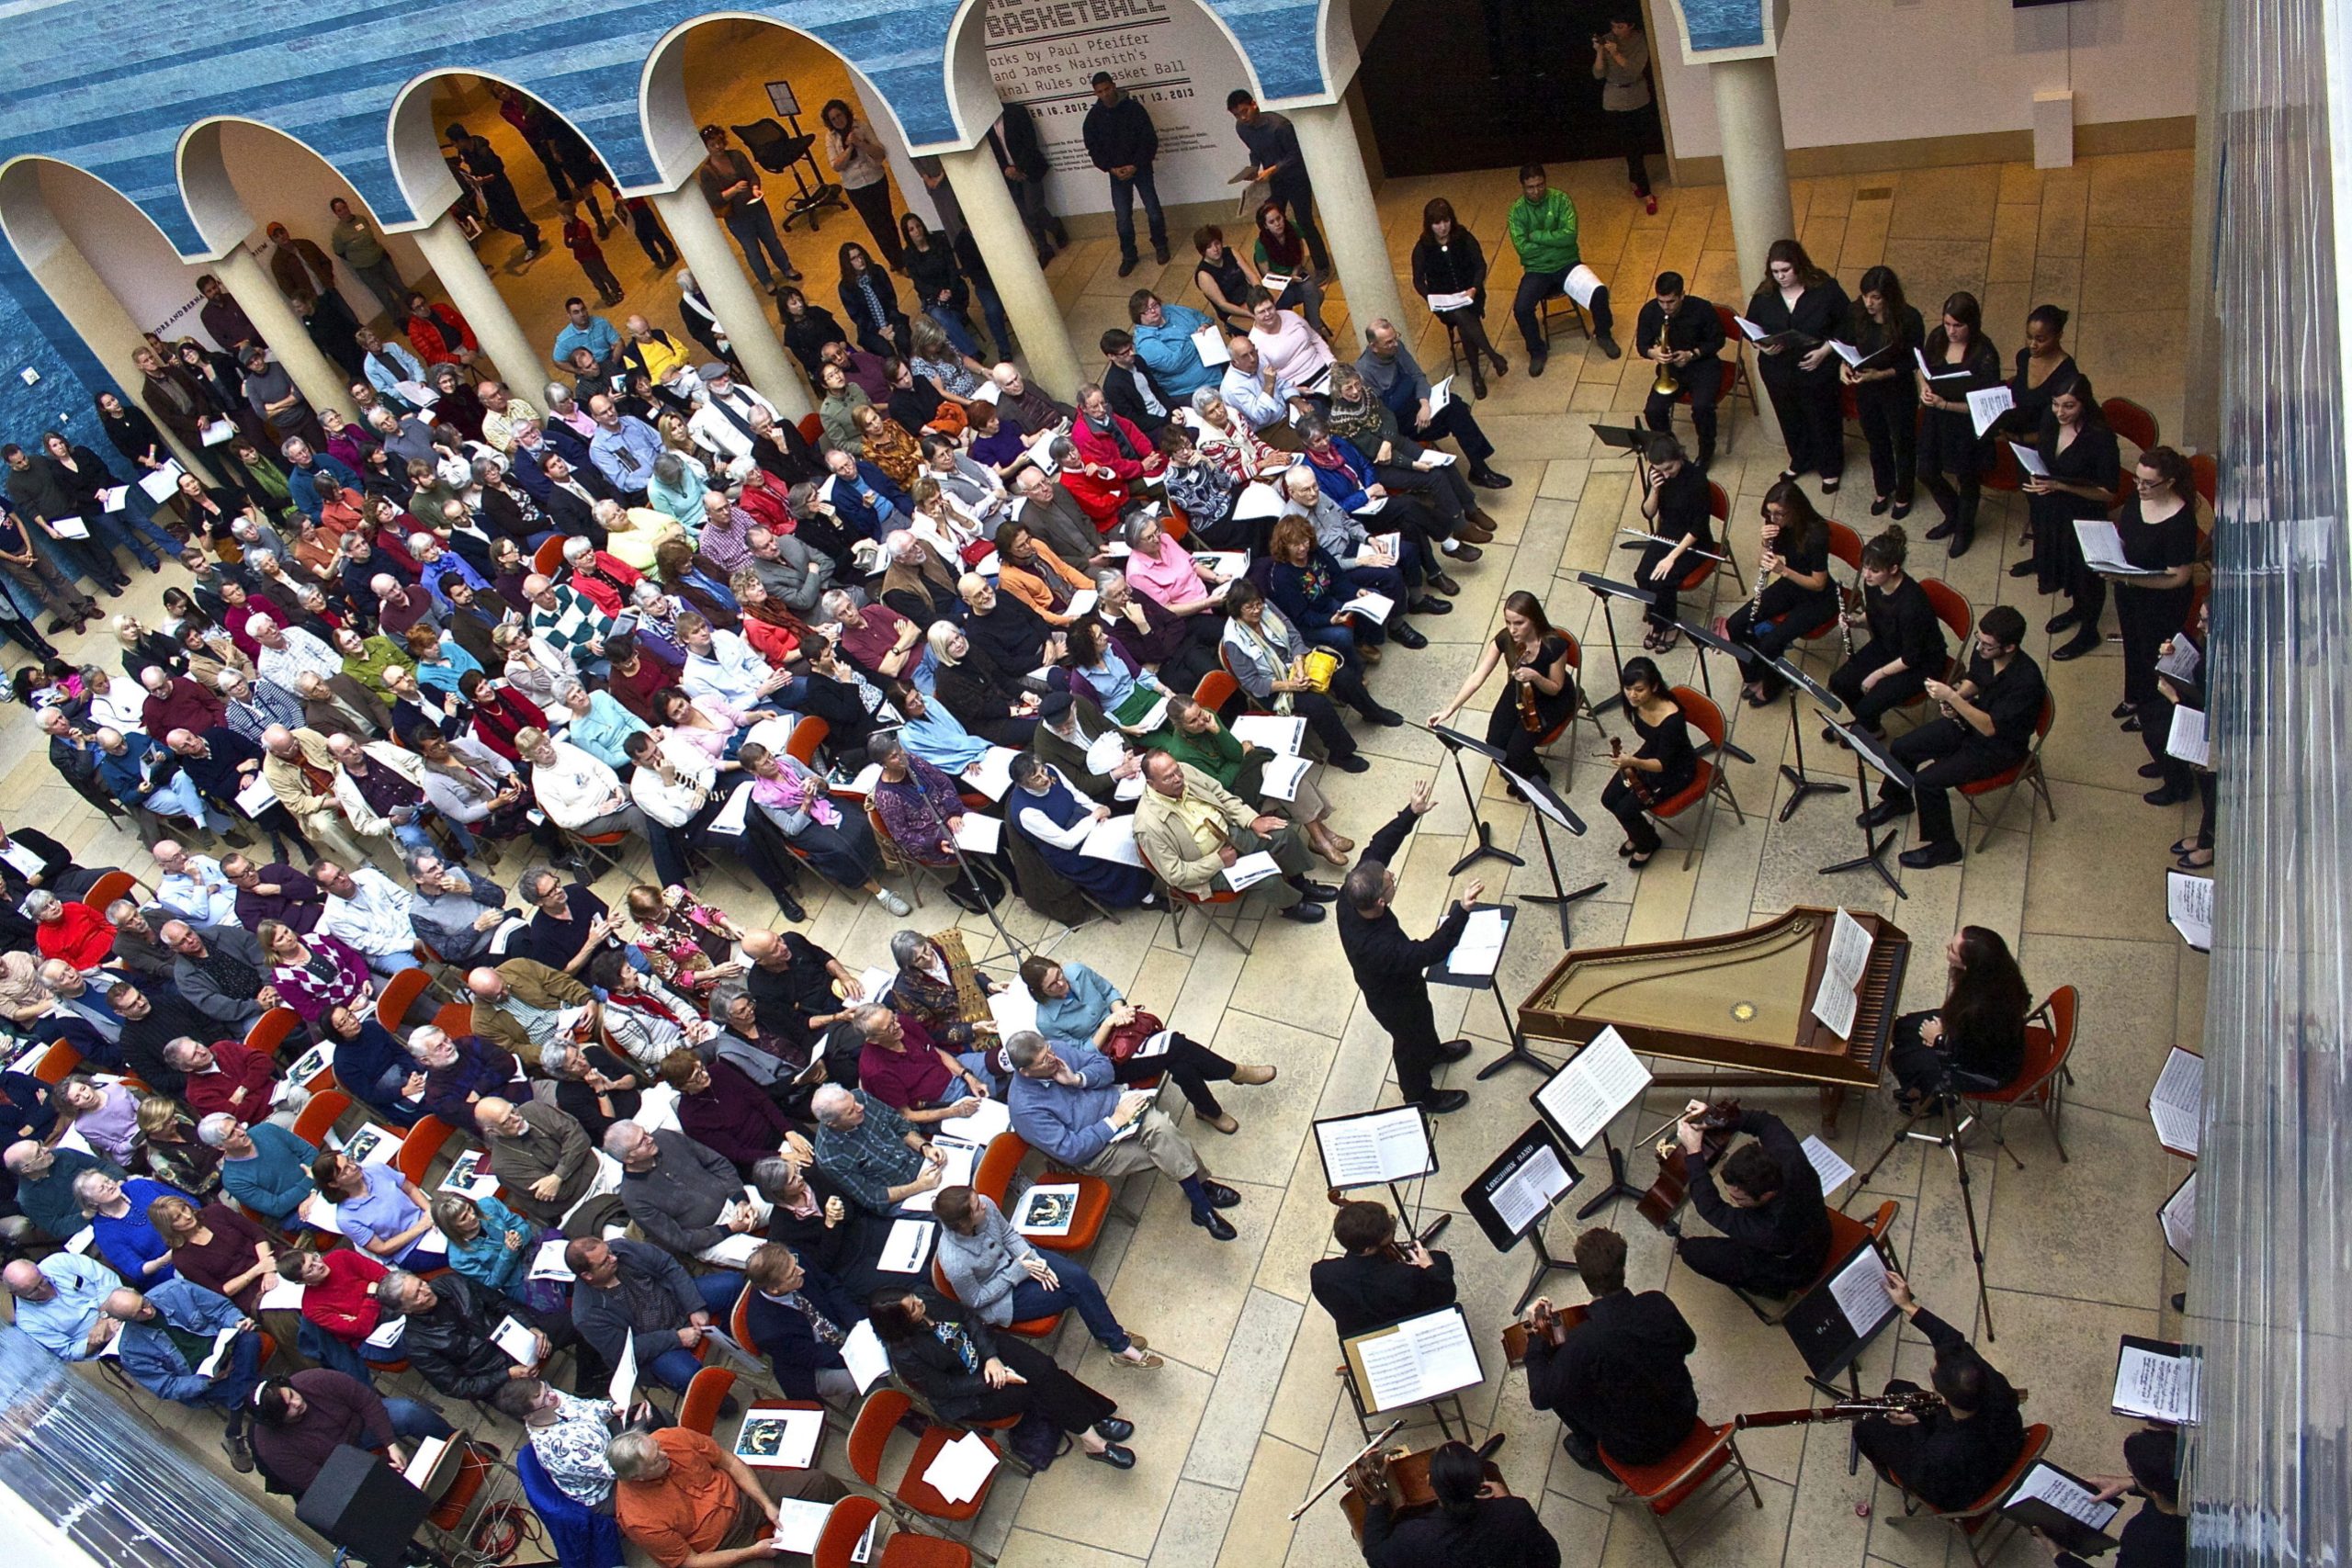 Photo of the atrium at the Blanton Museum of Art featuring a large audience sitting, listening to an orchestra perform. The guests are seated in rows on the left facing the orchestra on the right. The orchestra members are all wearing a coordinated black uniform playing a variety of instruments.